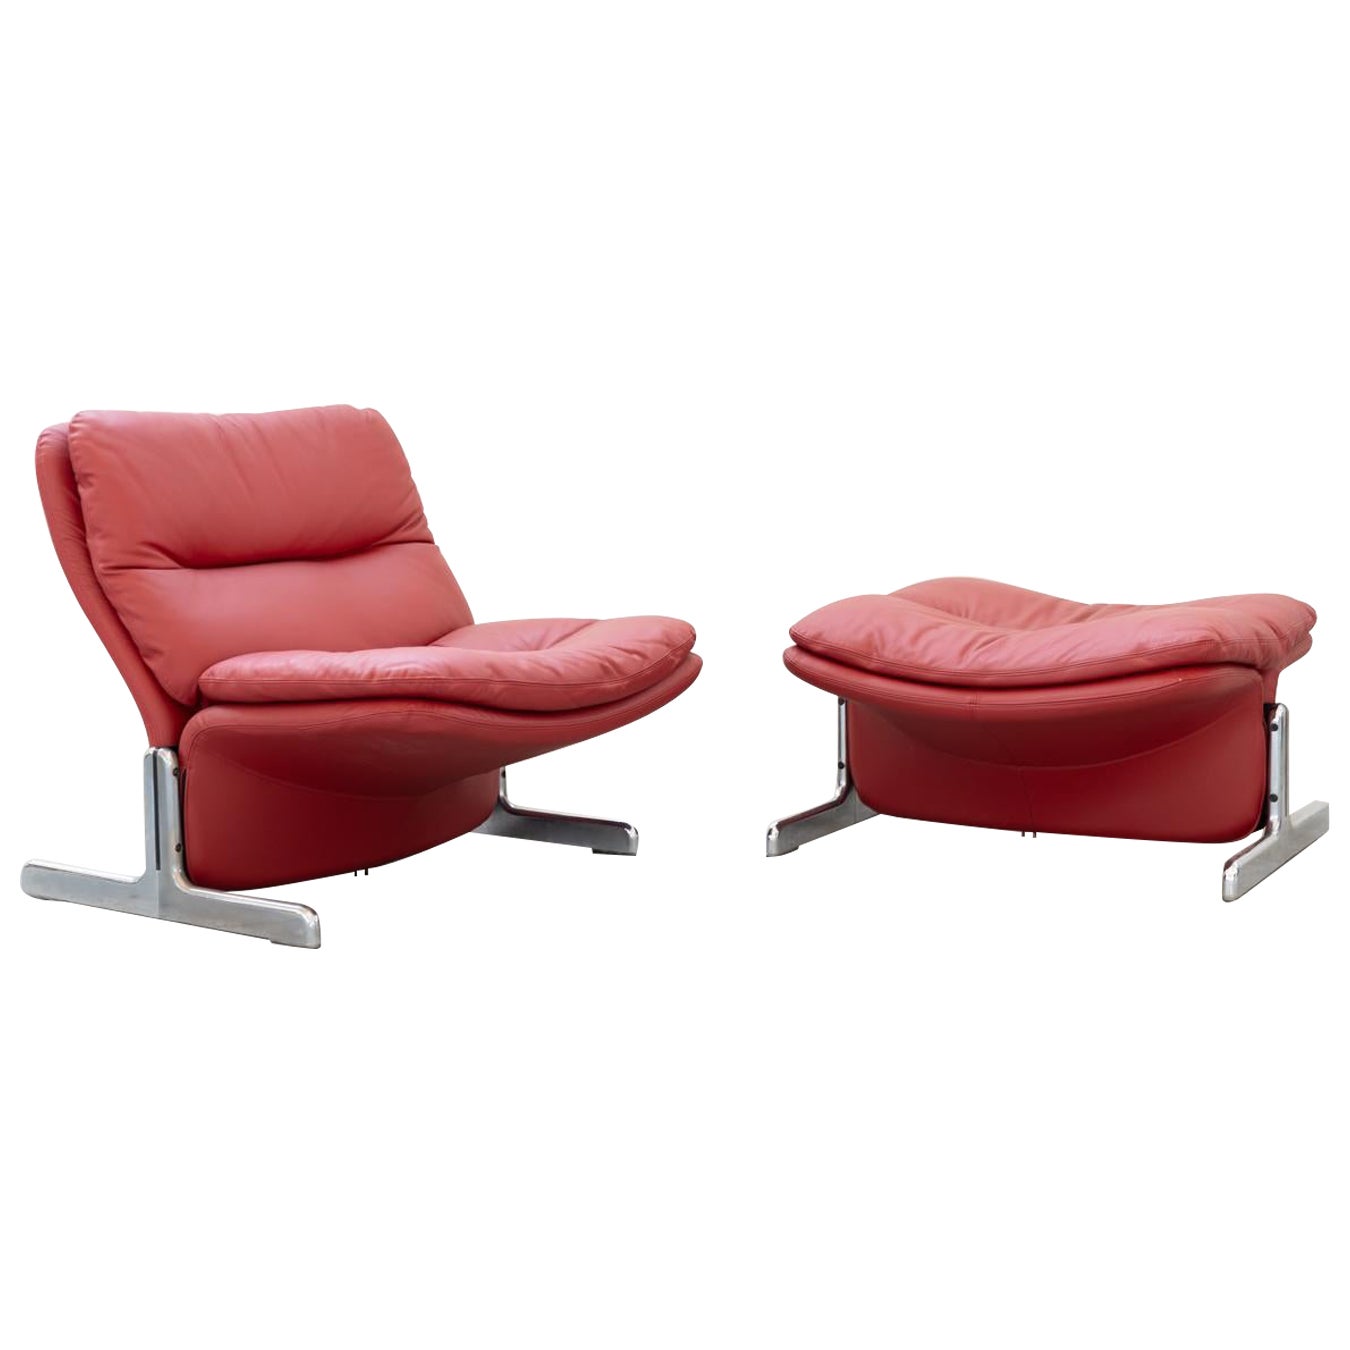 Red leather armchair and footstool, Vitelli and Ammannati, for Brunati 70/80s For Sale